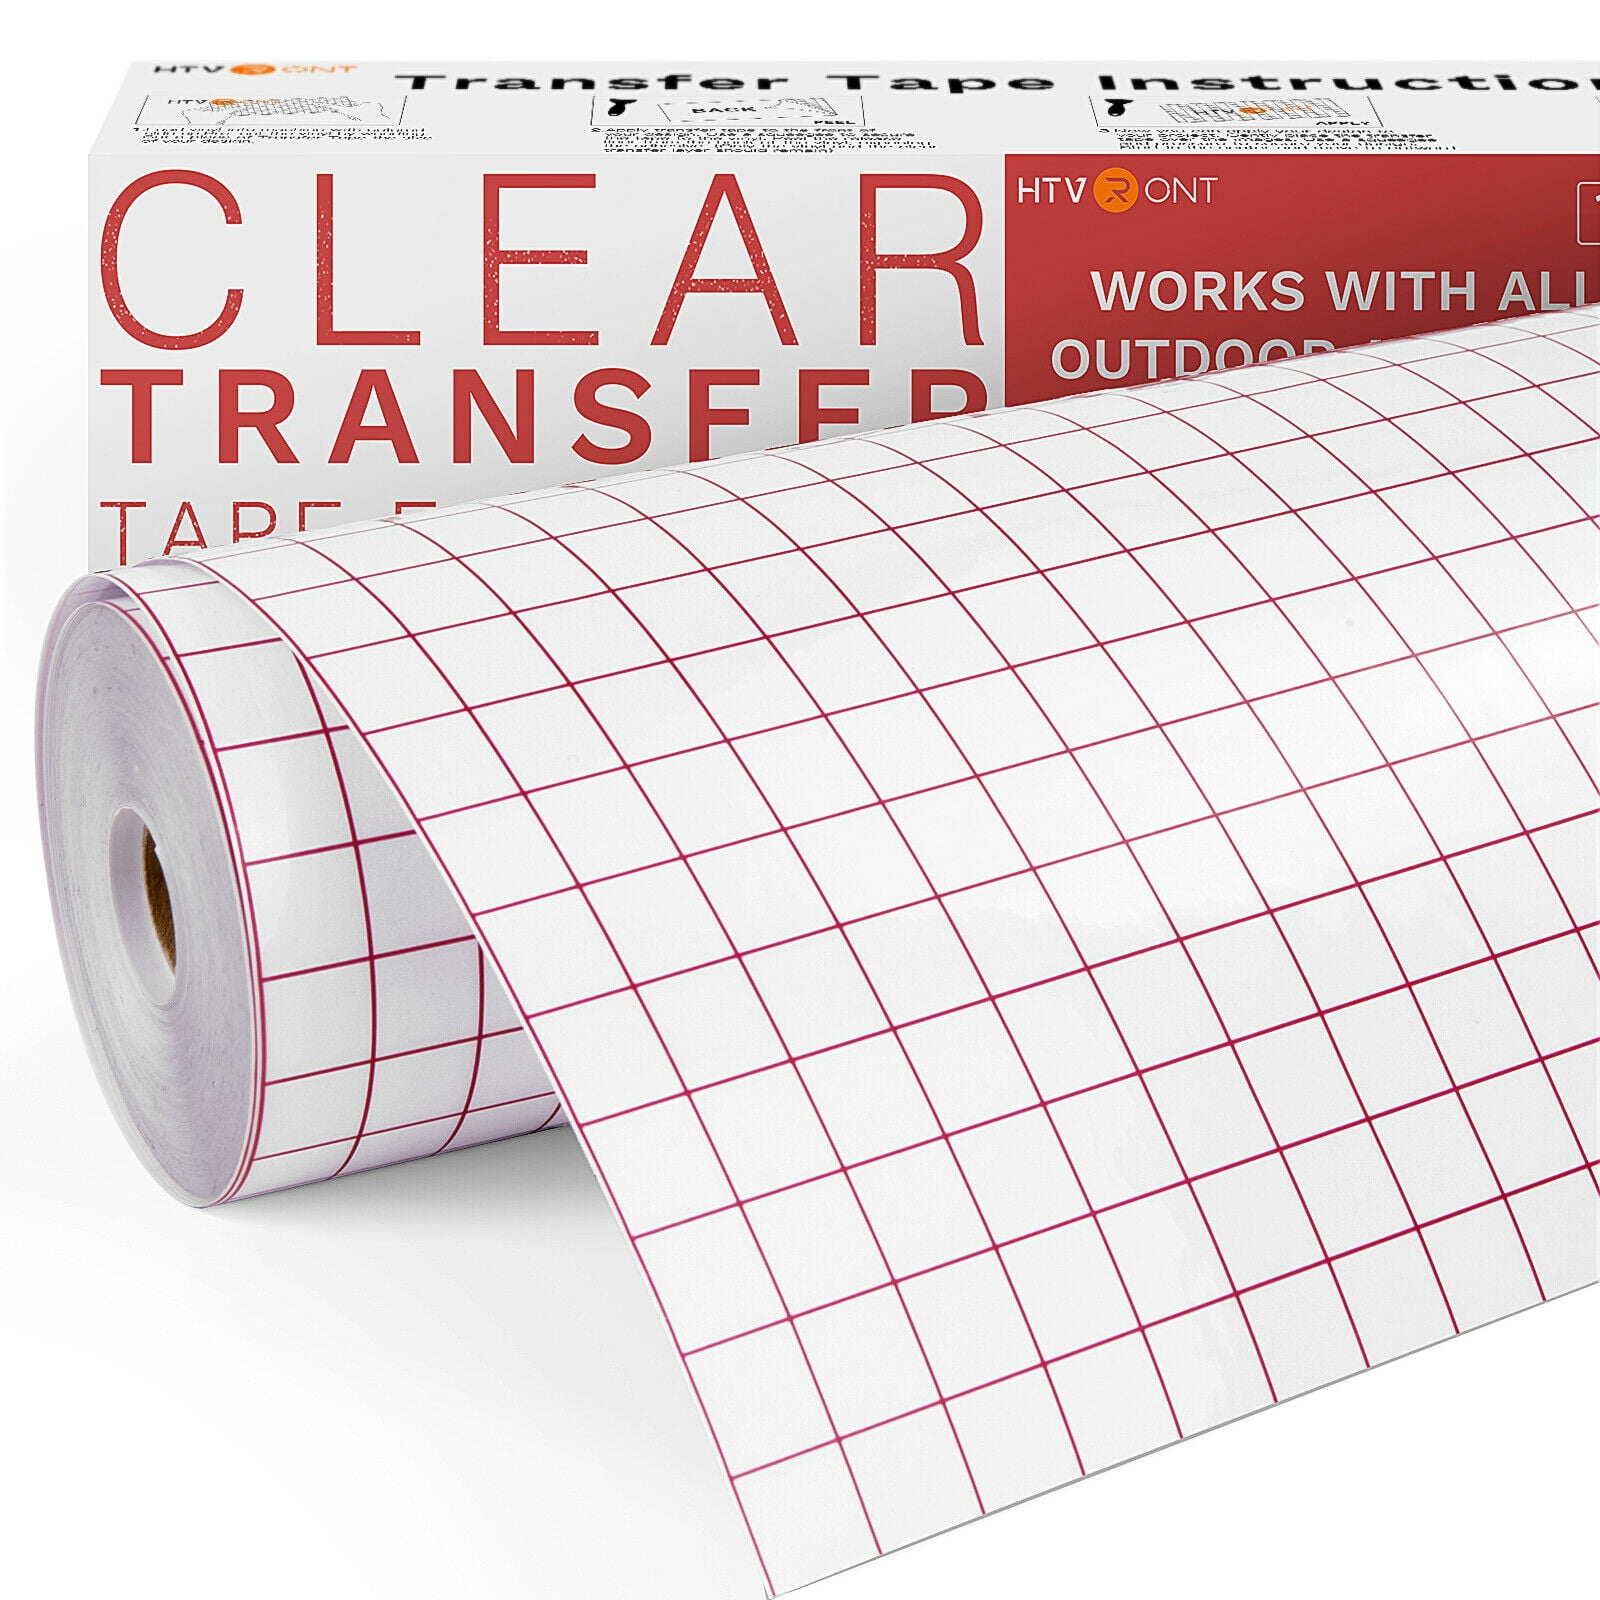 6 x 100 Roll of Clear Transfer Tape for Vinyl, Made in America, Vinyl Transfer  Tape with Alignment Grid for Cricut Crafts, Decals, and Letters